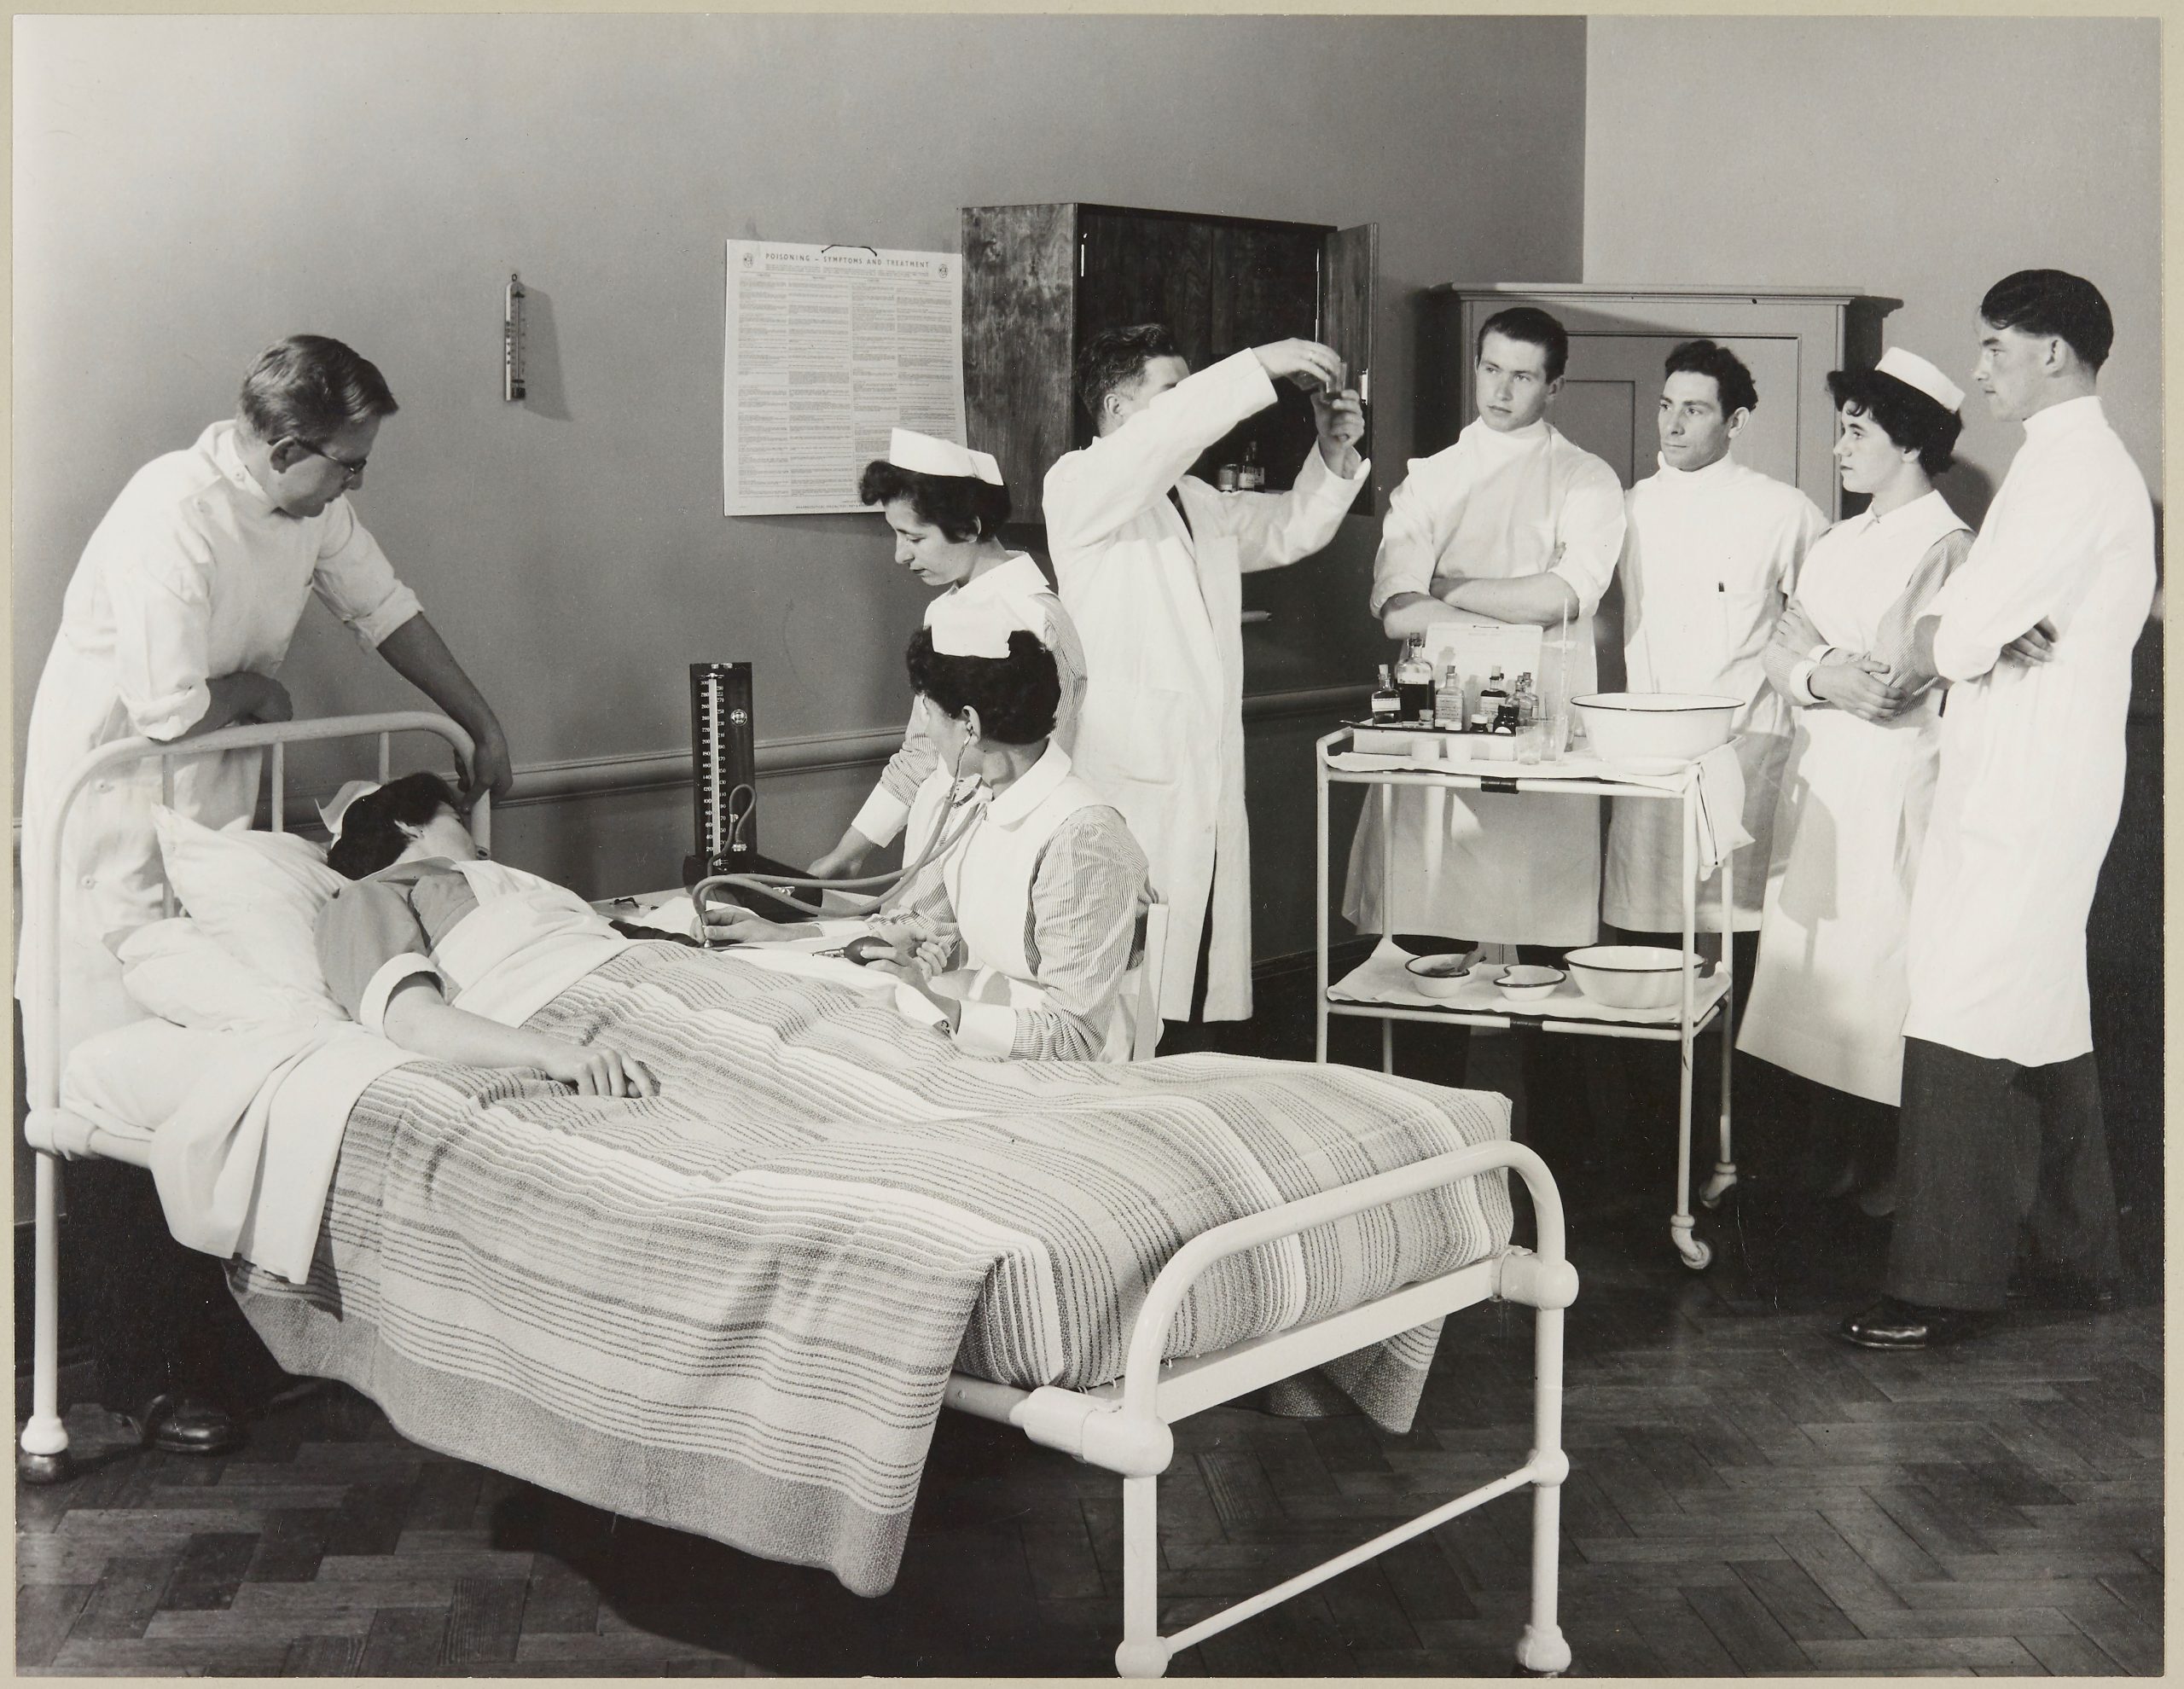 Barnsley Hall medical staff around patient bed